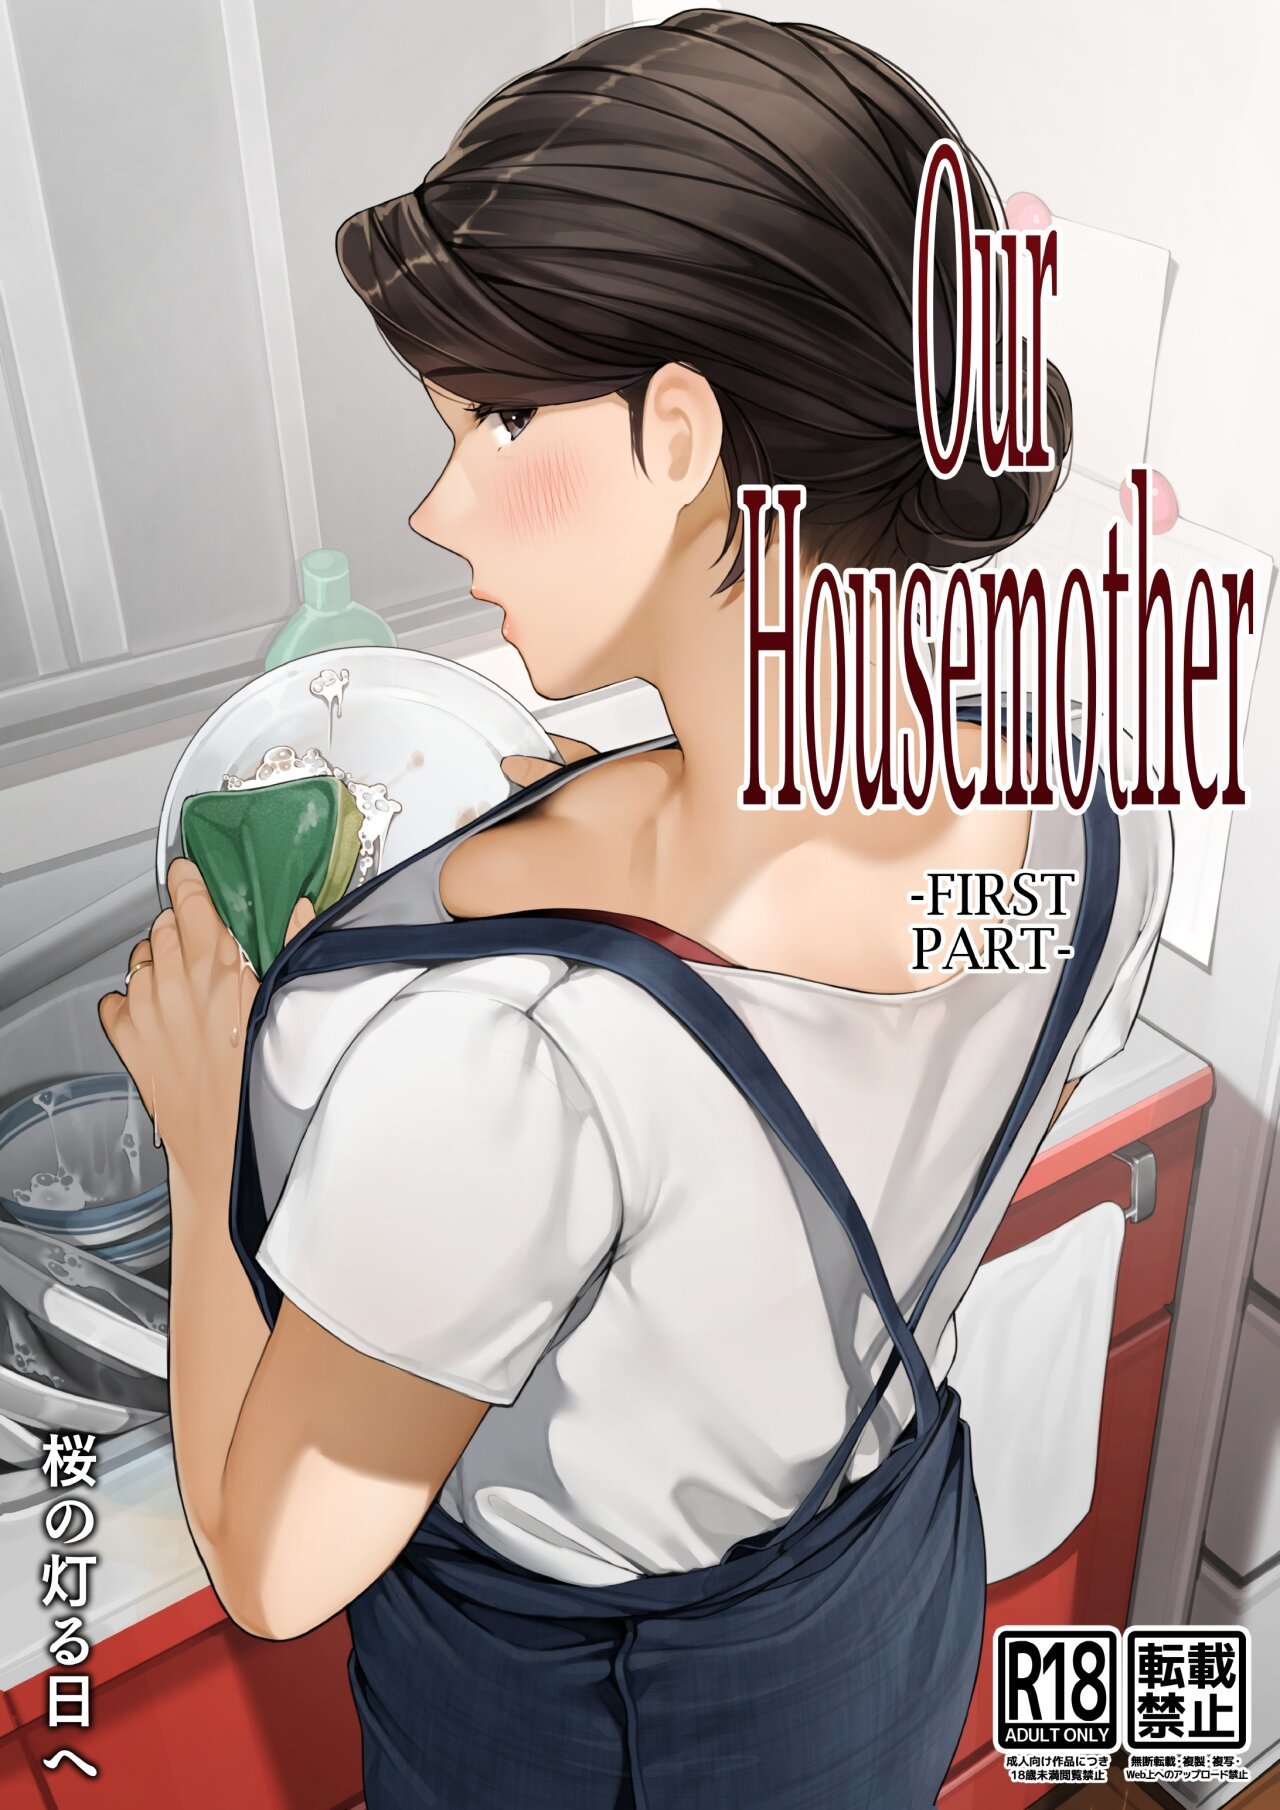 Our Housemother - First Part - 1